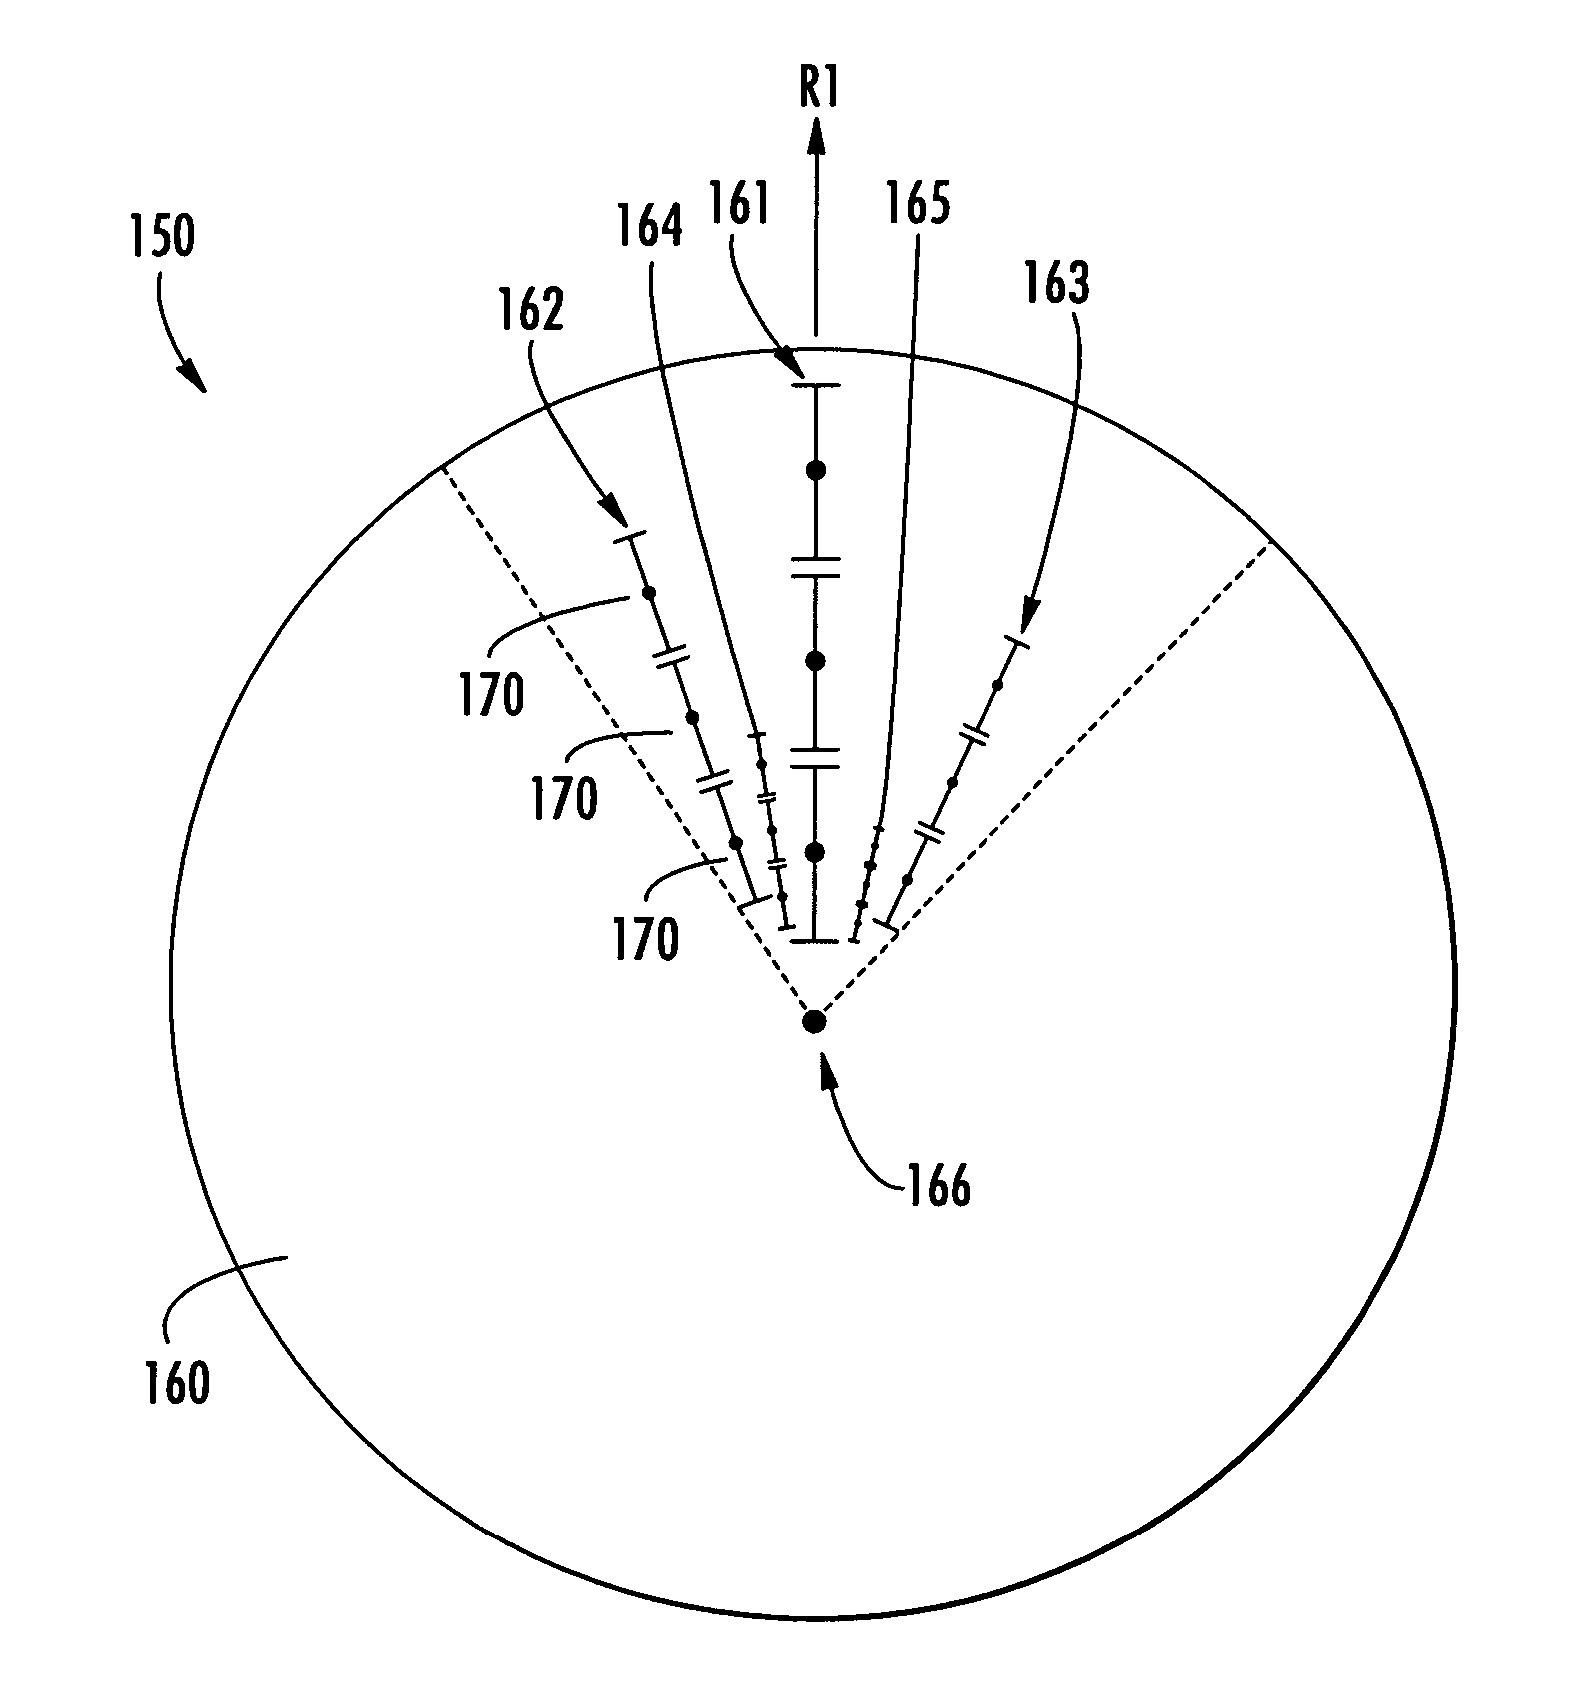 Multiband polygonally distributed phased array antenna and associated methods